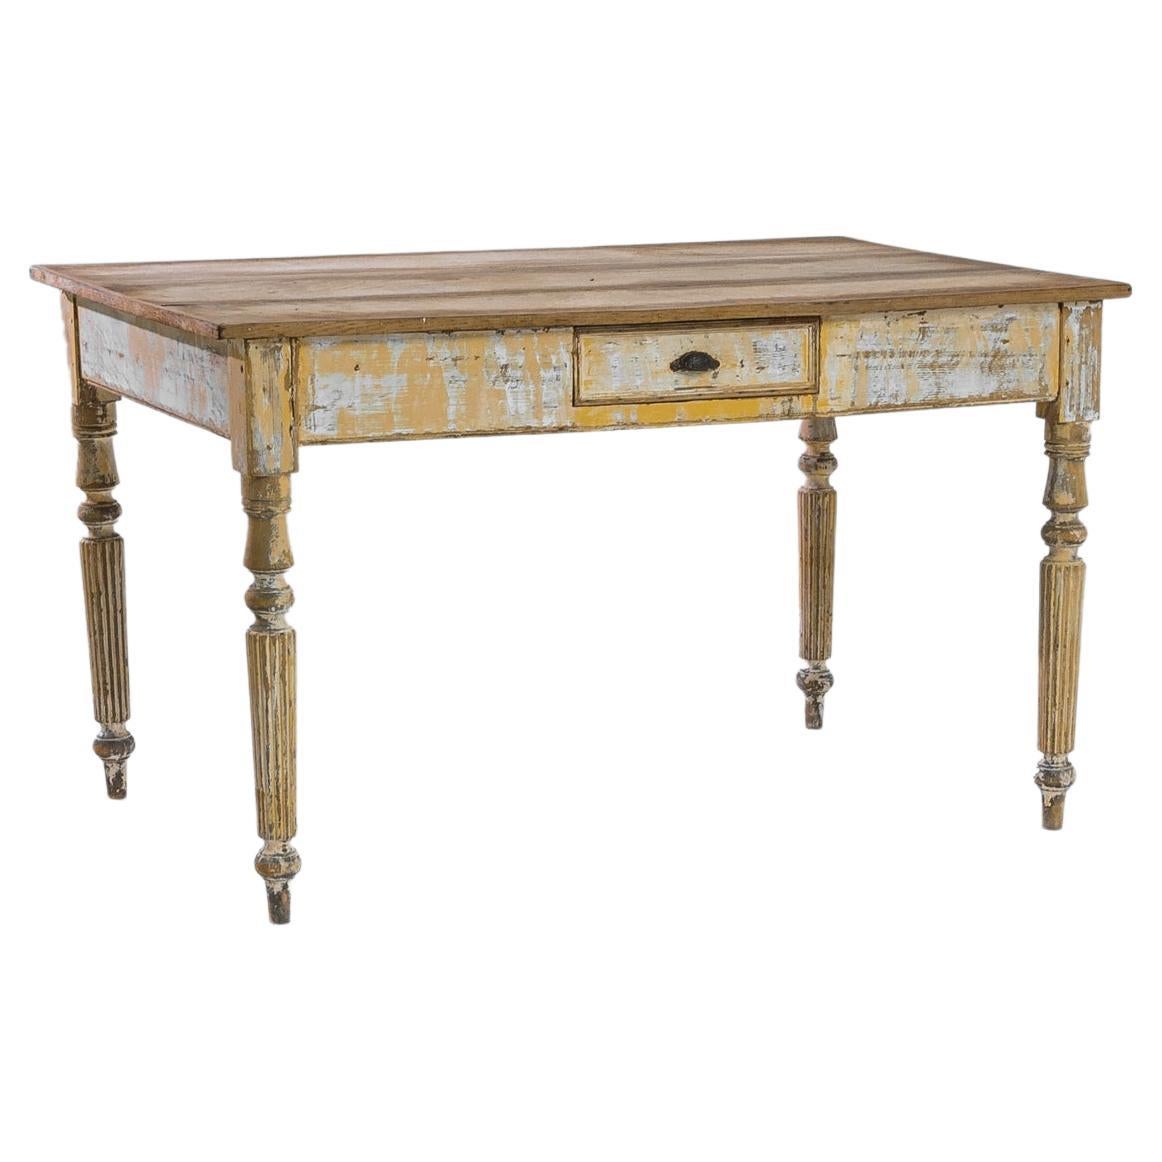 Antique Country French Wood Patinated Table For Sale